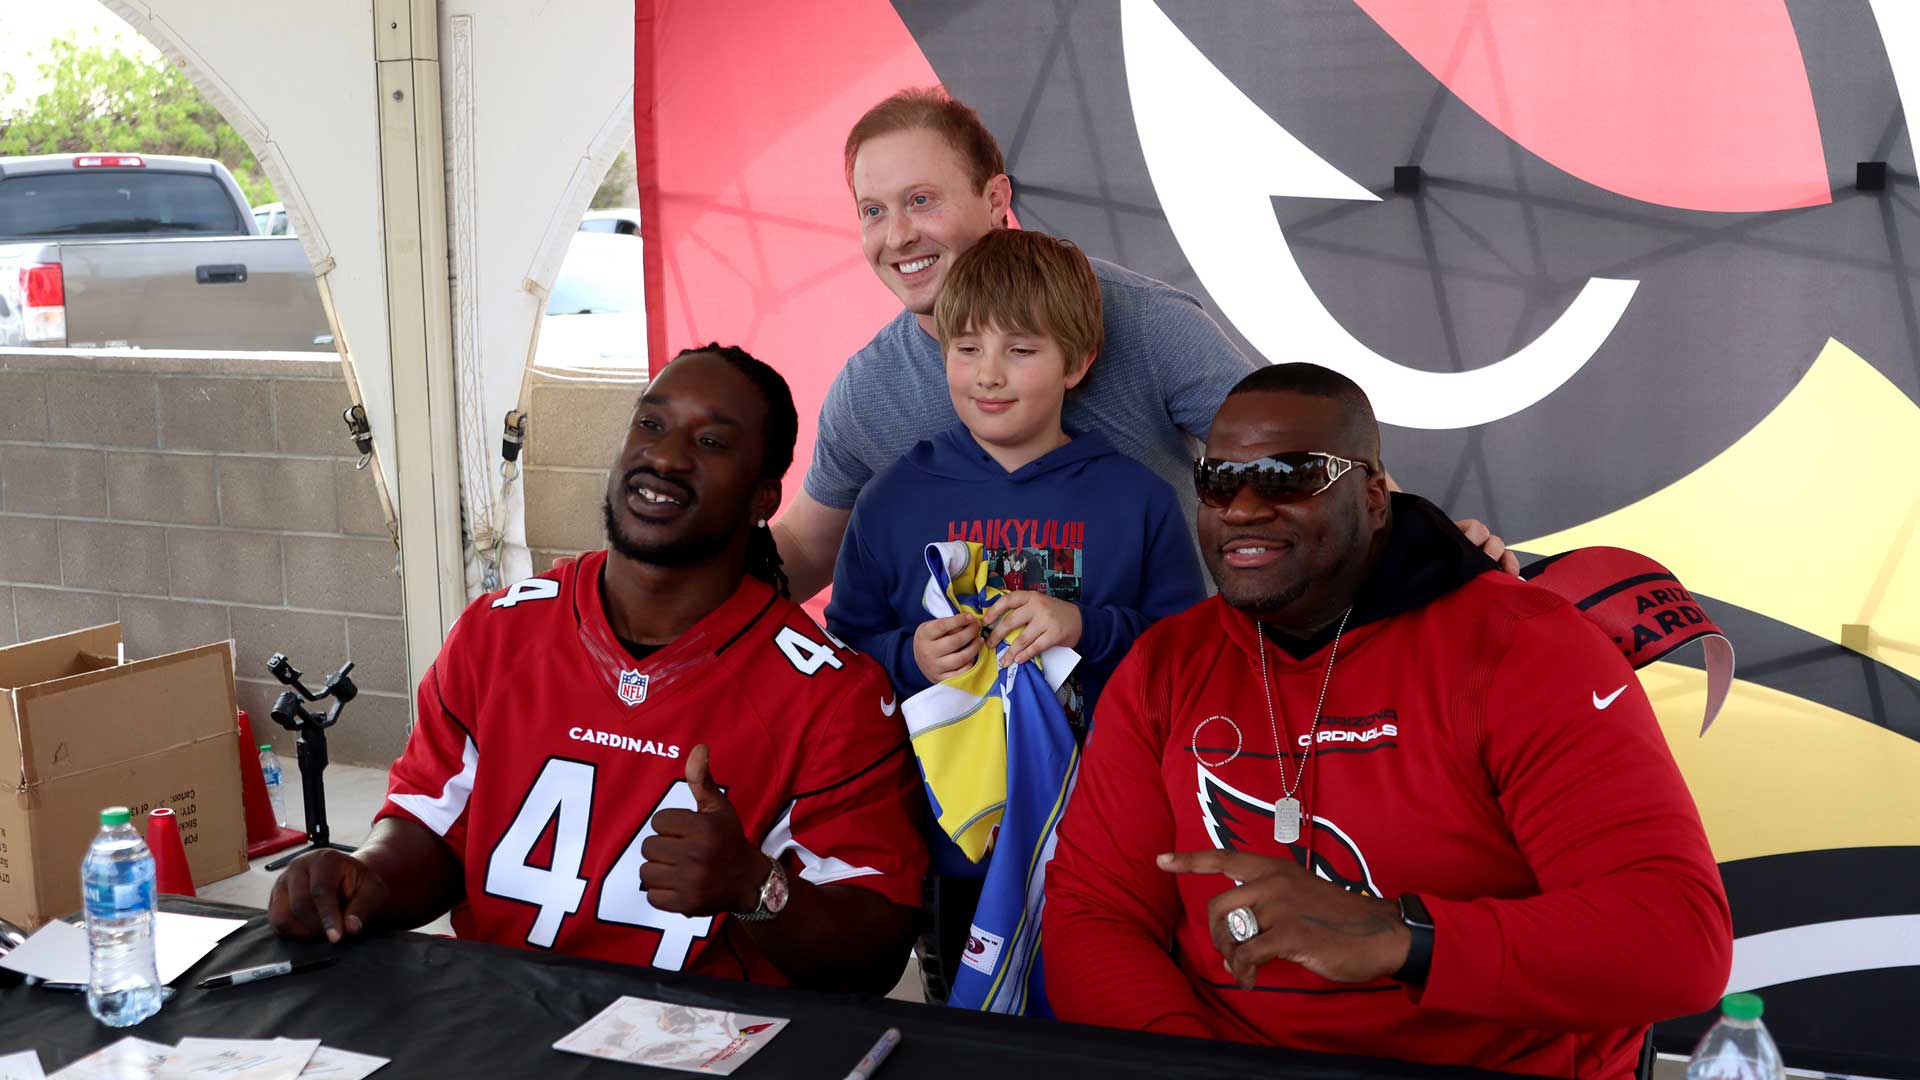 The Arizona Cardinals rank first in the NFL for fan experience, according to one study.